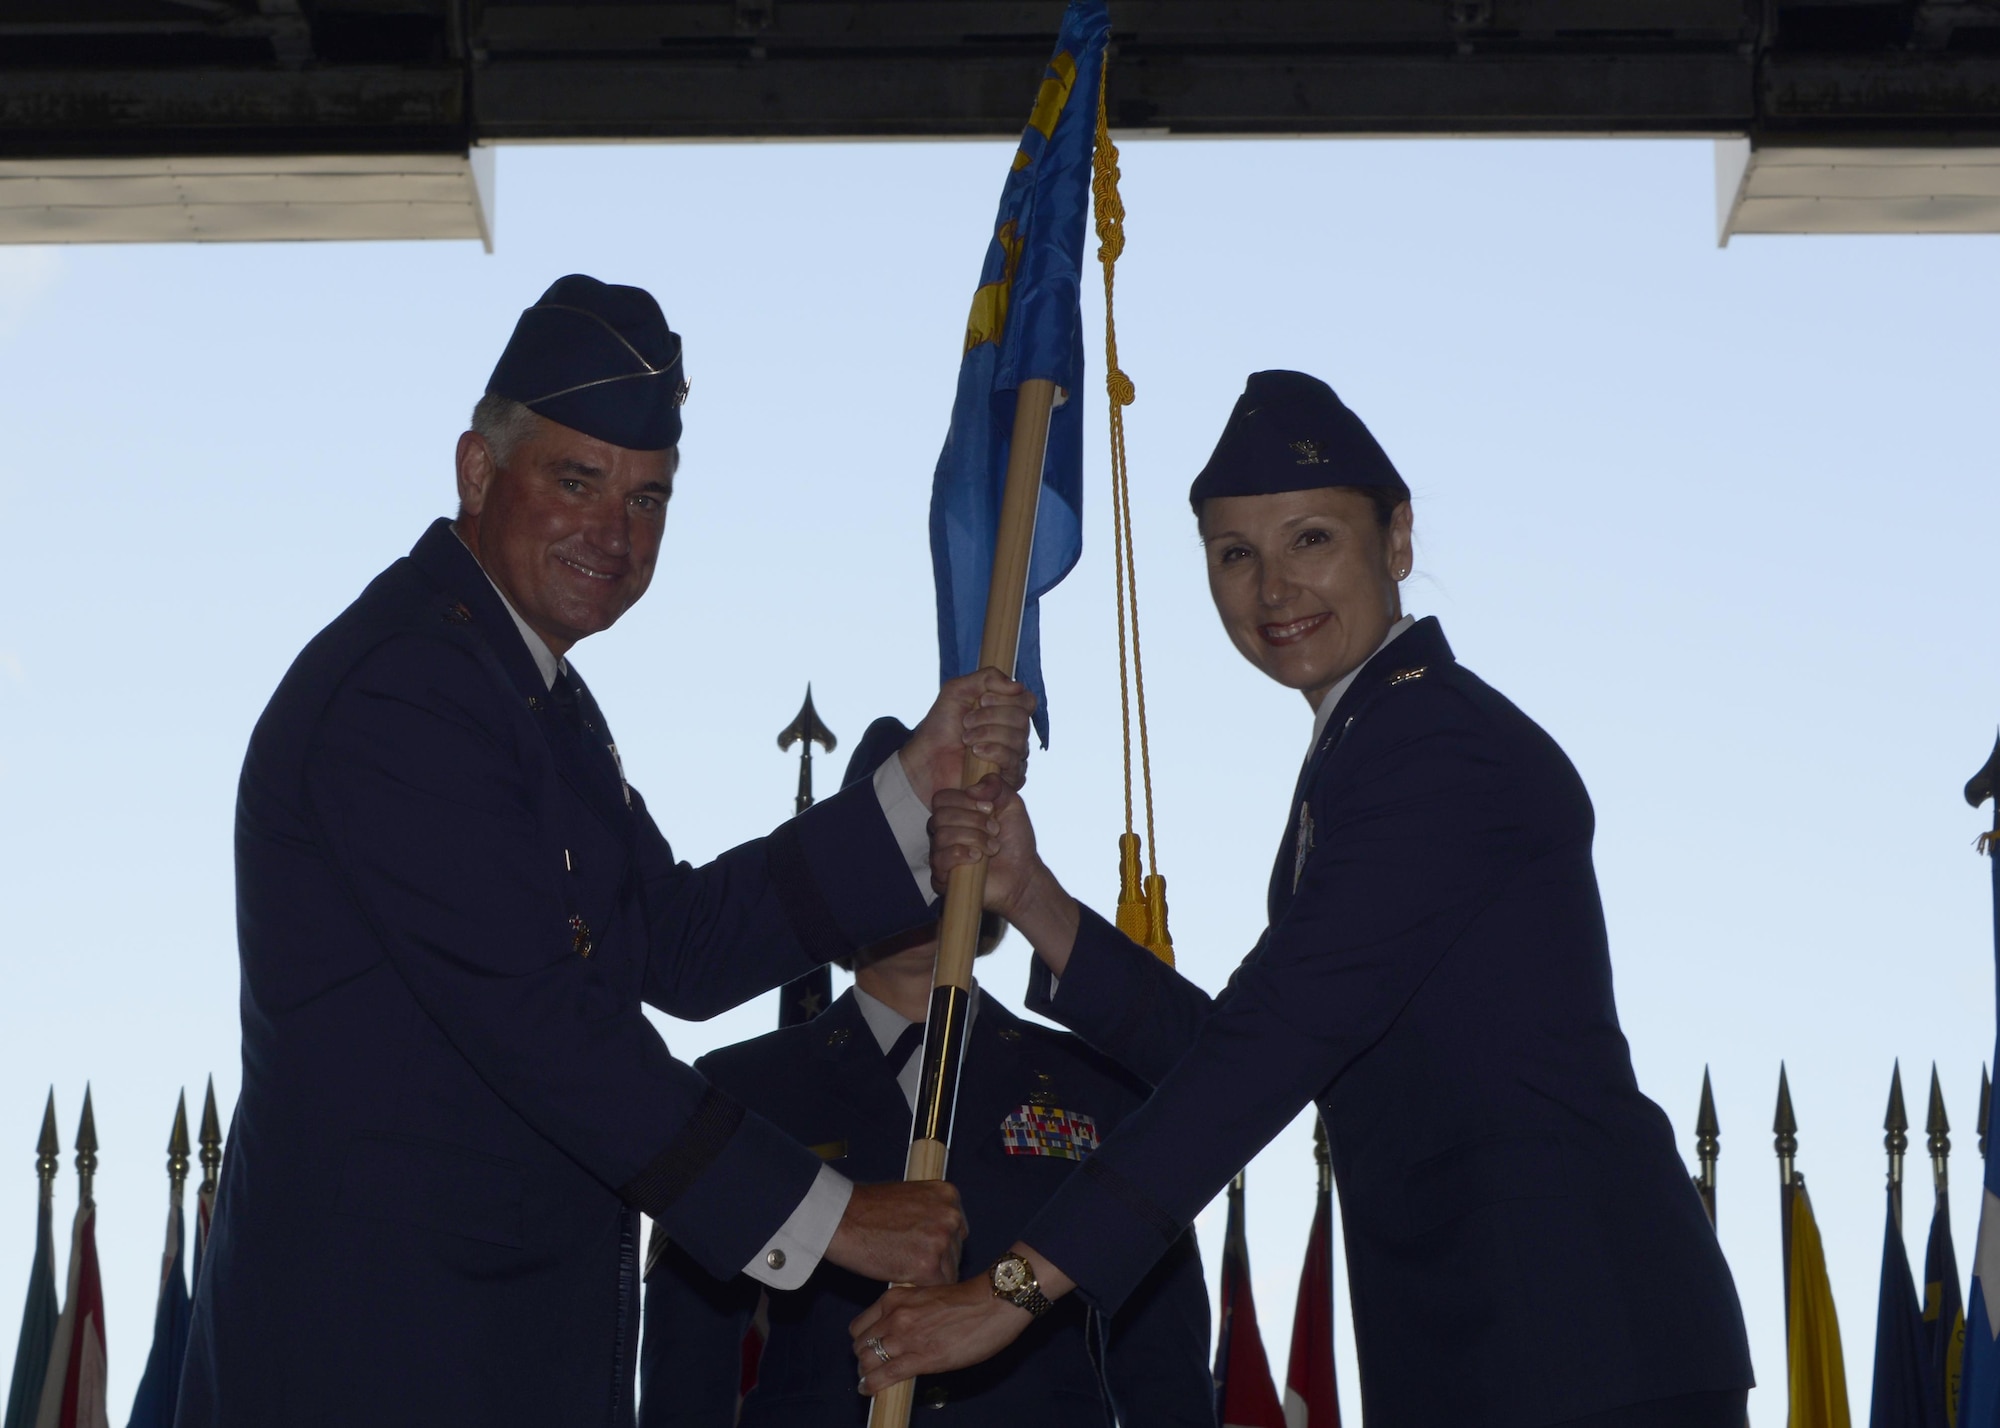 Lt. Gen. Samuel Cox, commander of the 18th Air Force, passes the 6th Air Mobility Wing guidon to the incoming commander, Col. April Vogel, during the wing change of command ceremony at MacDill Air Force Base, Fla., July 8, 2016. During Vogel’s previous assignment she was the vice commander of the 175th Wing, Warfield Air National Guard Base, Md. (U.S. Air Force photo by Tech. Sgt. Krystie Martinez)